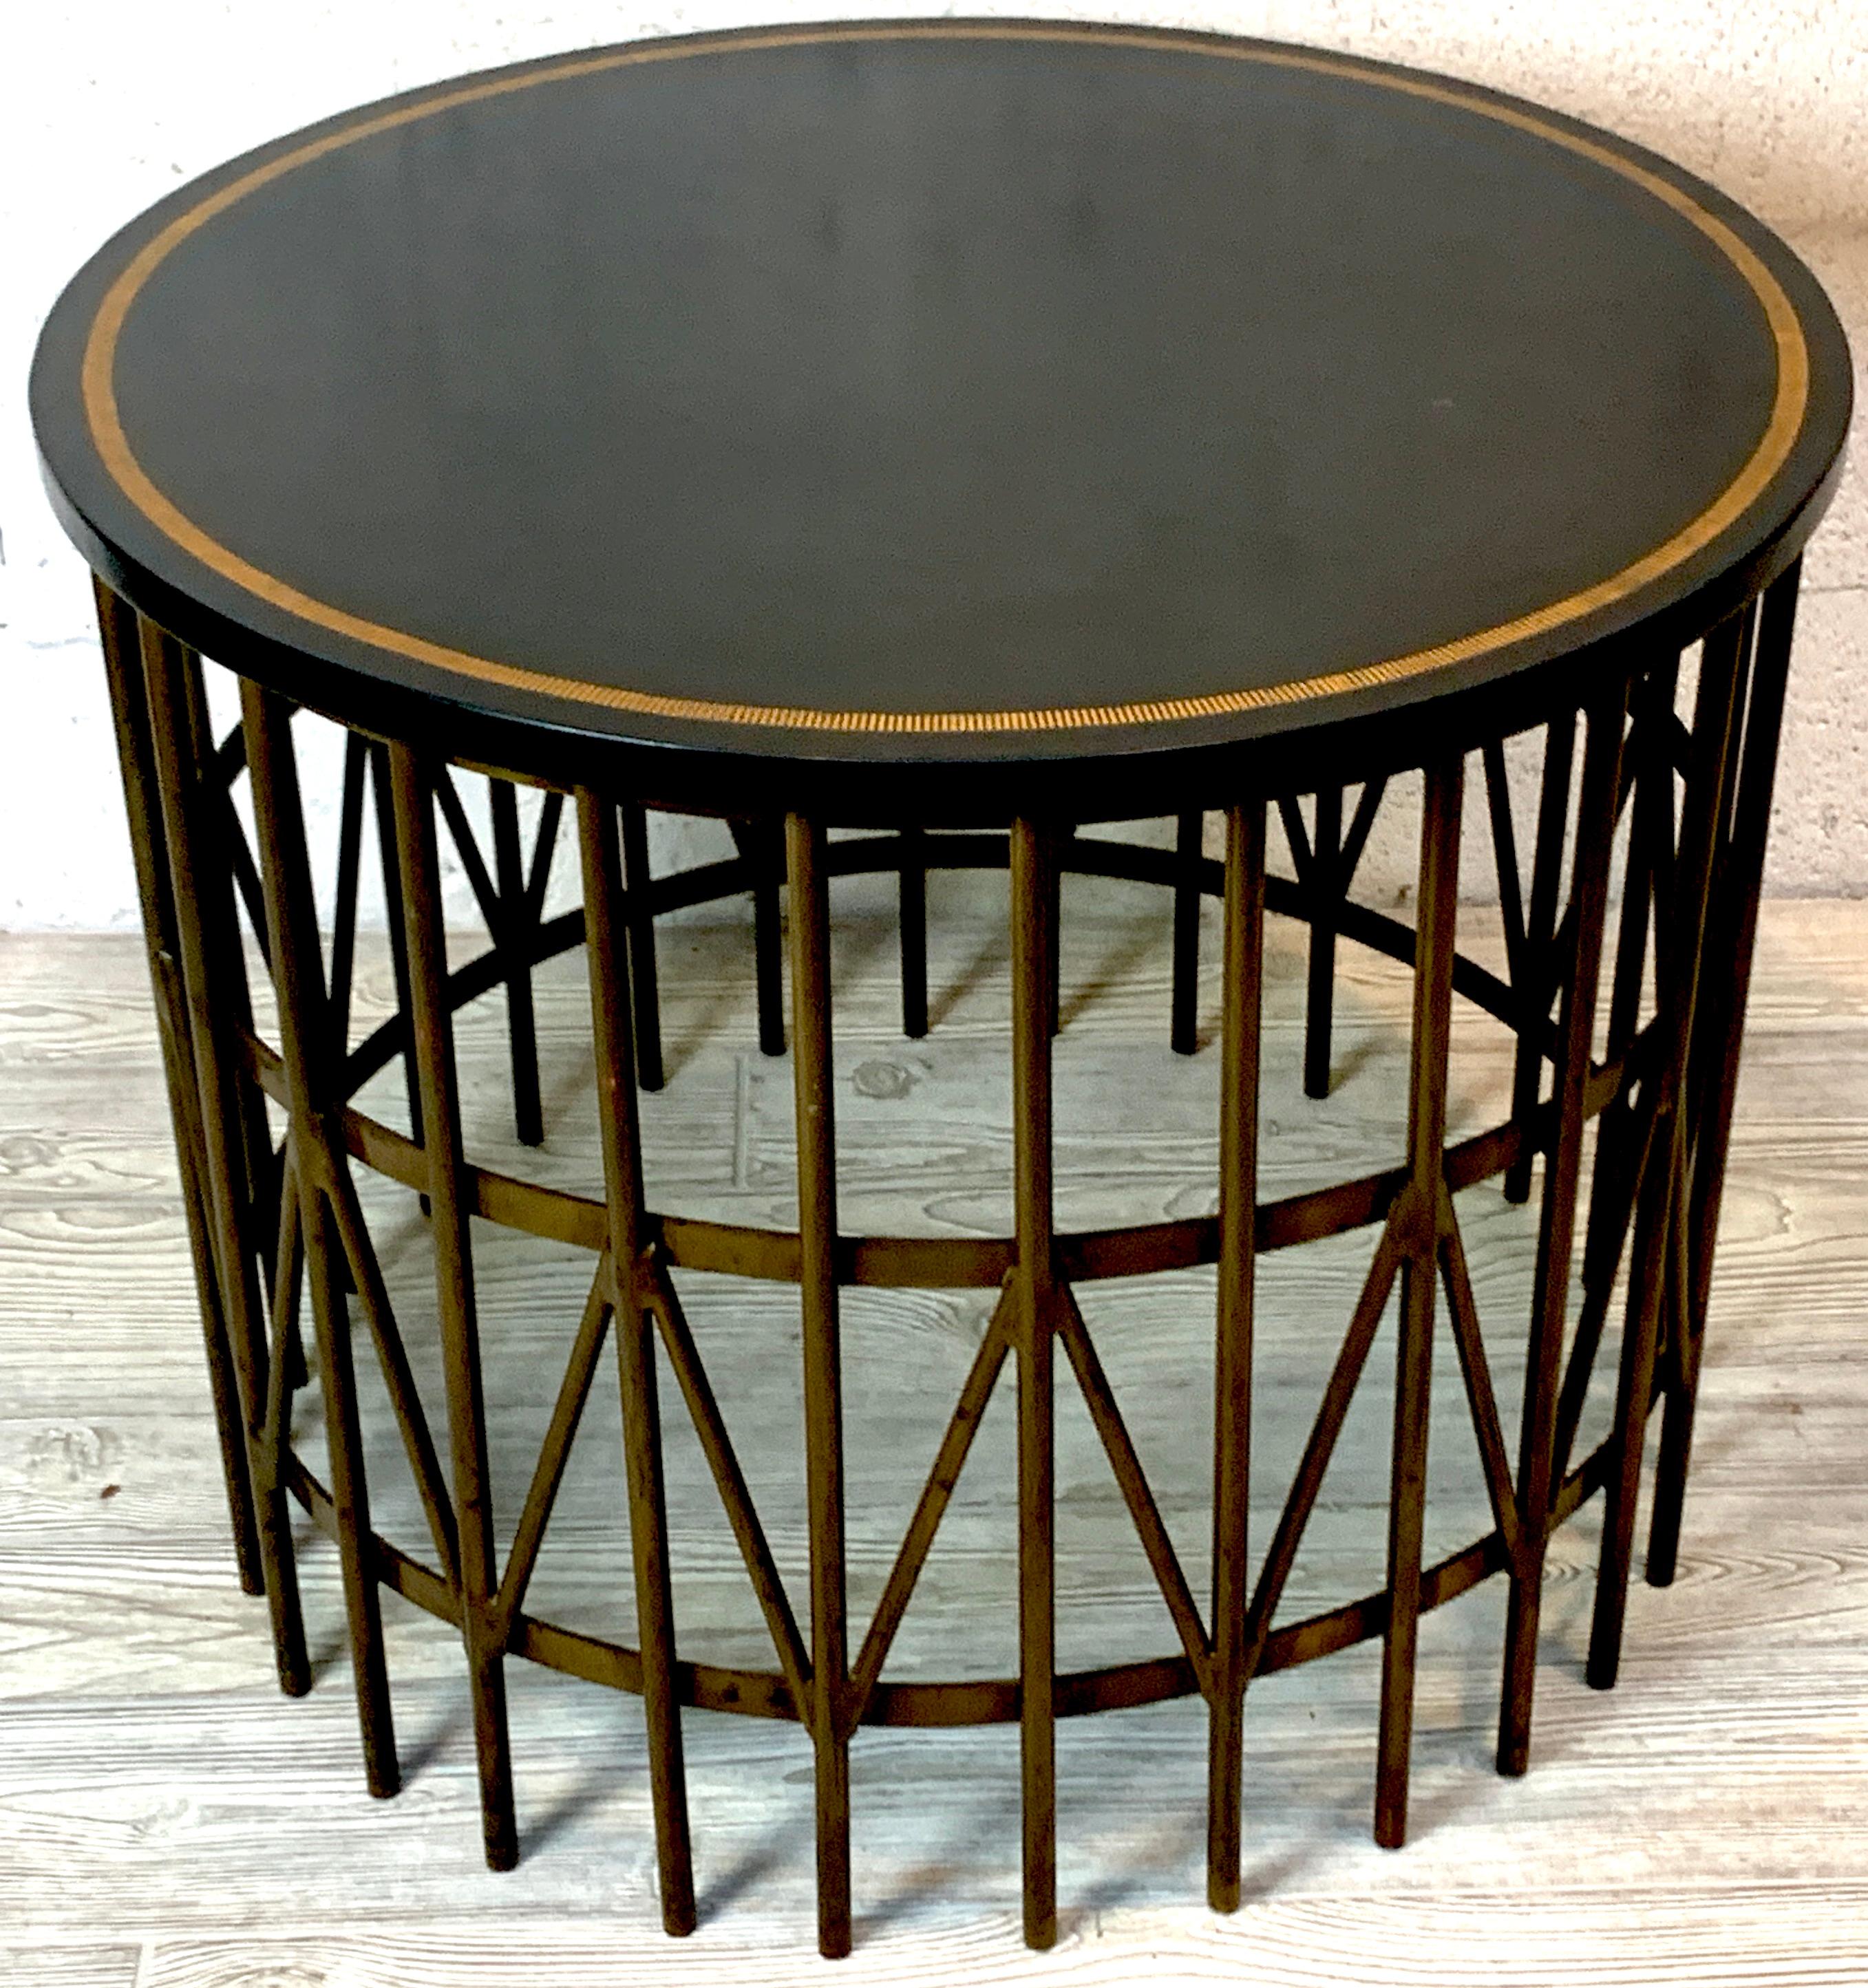 French Modern gilt green leather and brass guéridon, with circular gilt edge subtle green leather top, resting on a cast brass geometric base.